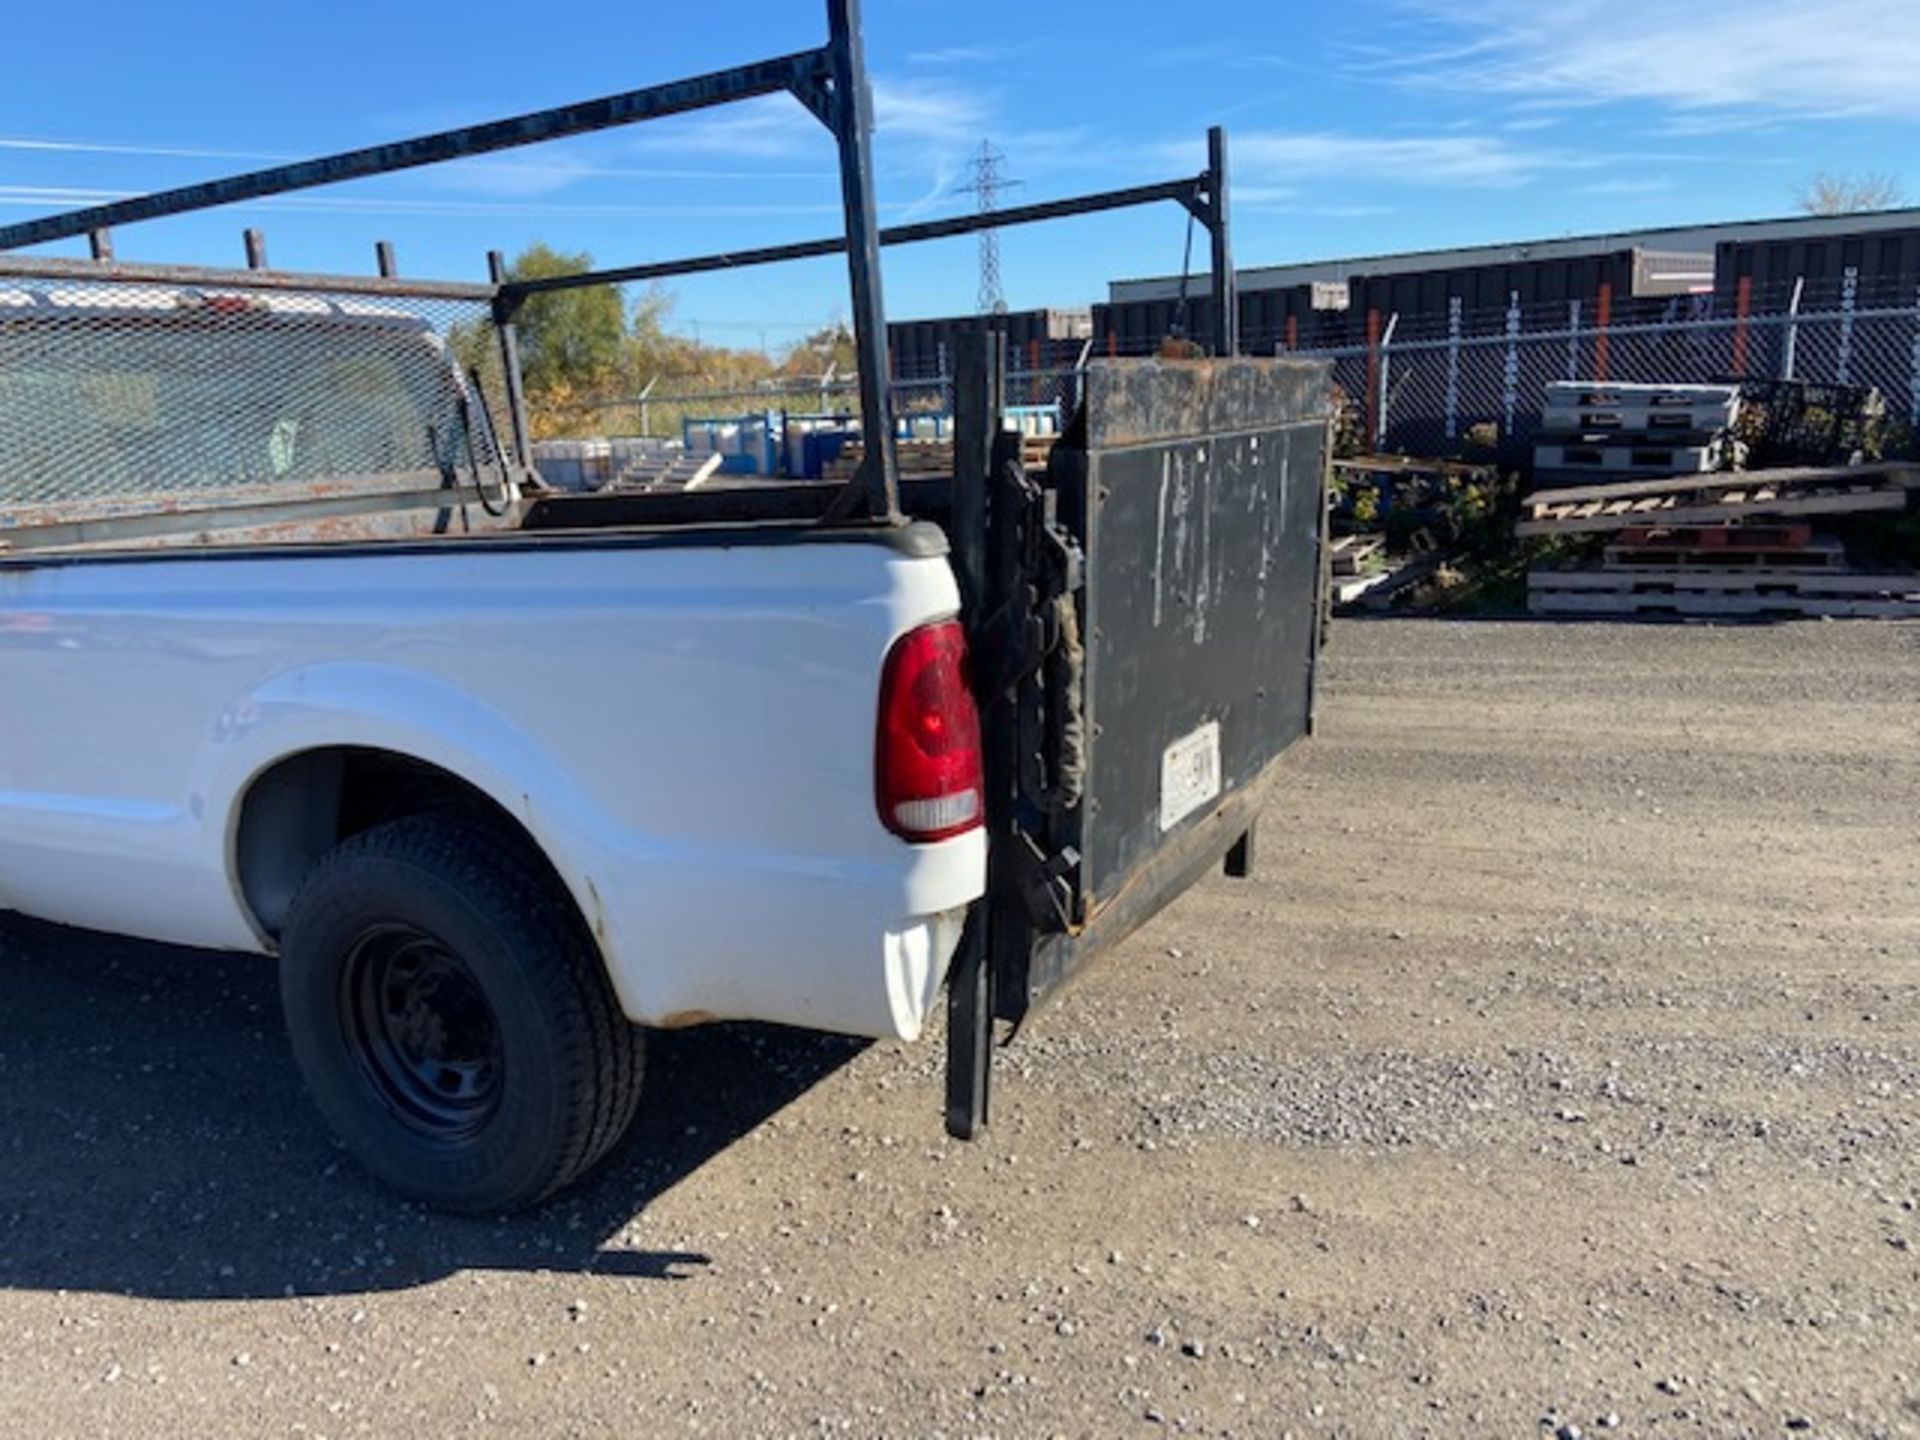 2002 Ford F-350 Pickup Truck with Hydraulic Lift Gate and Racks - NEW 2016 engine - 140,000km - Image 6 of 6